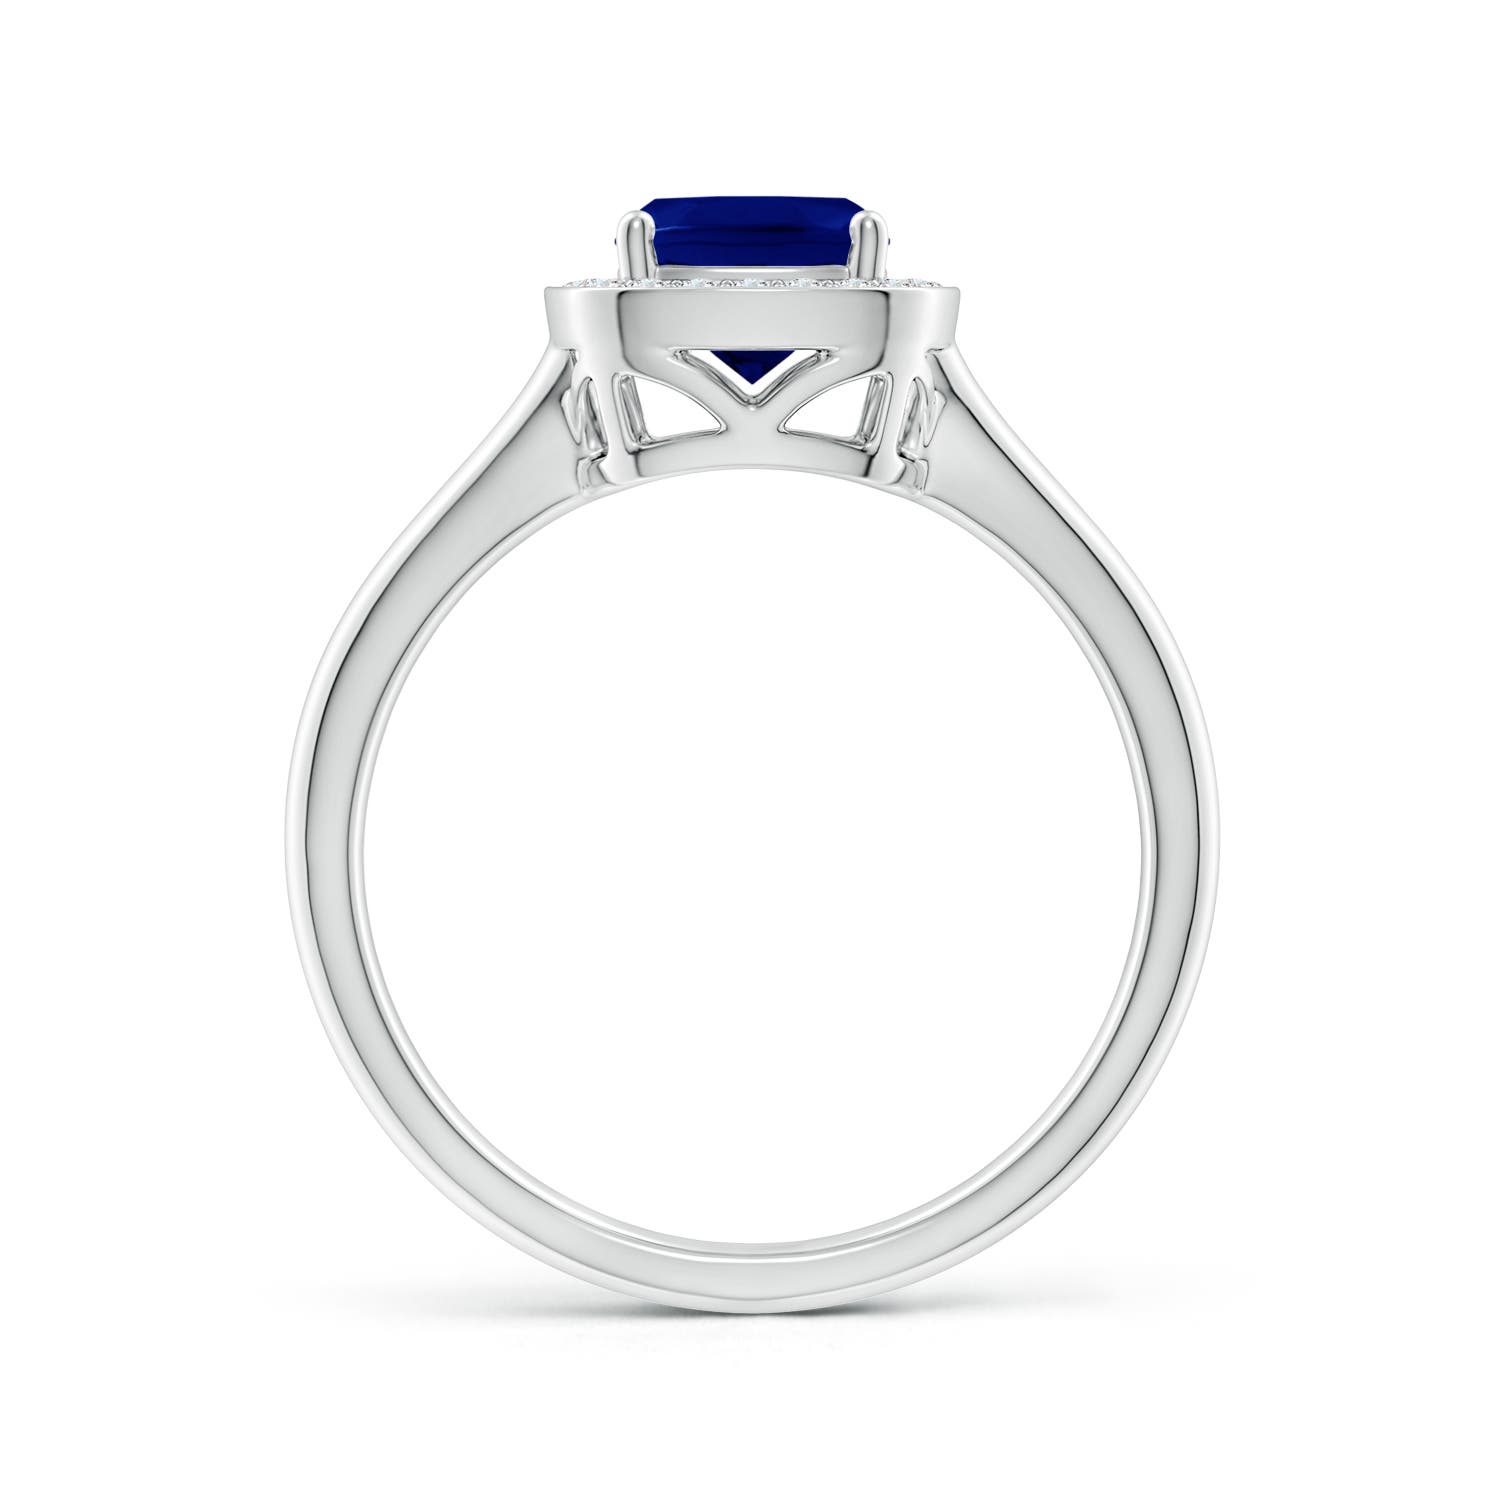 AAA - Blue Sapphire / 0.68 CT / 14 KT White Gold